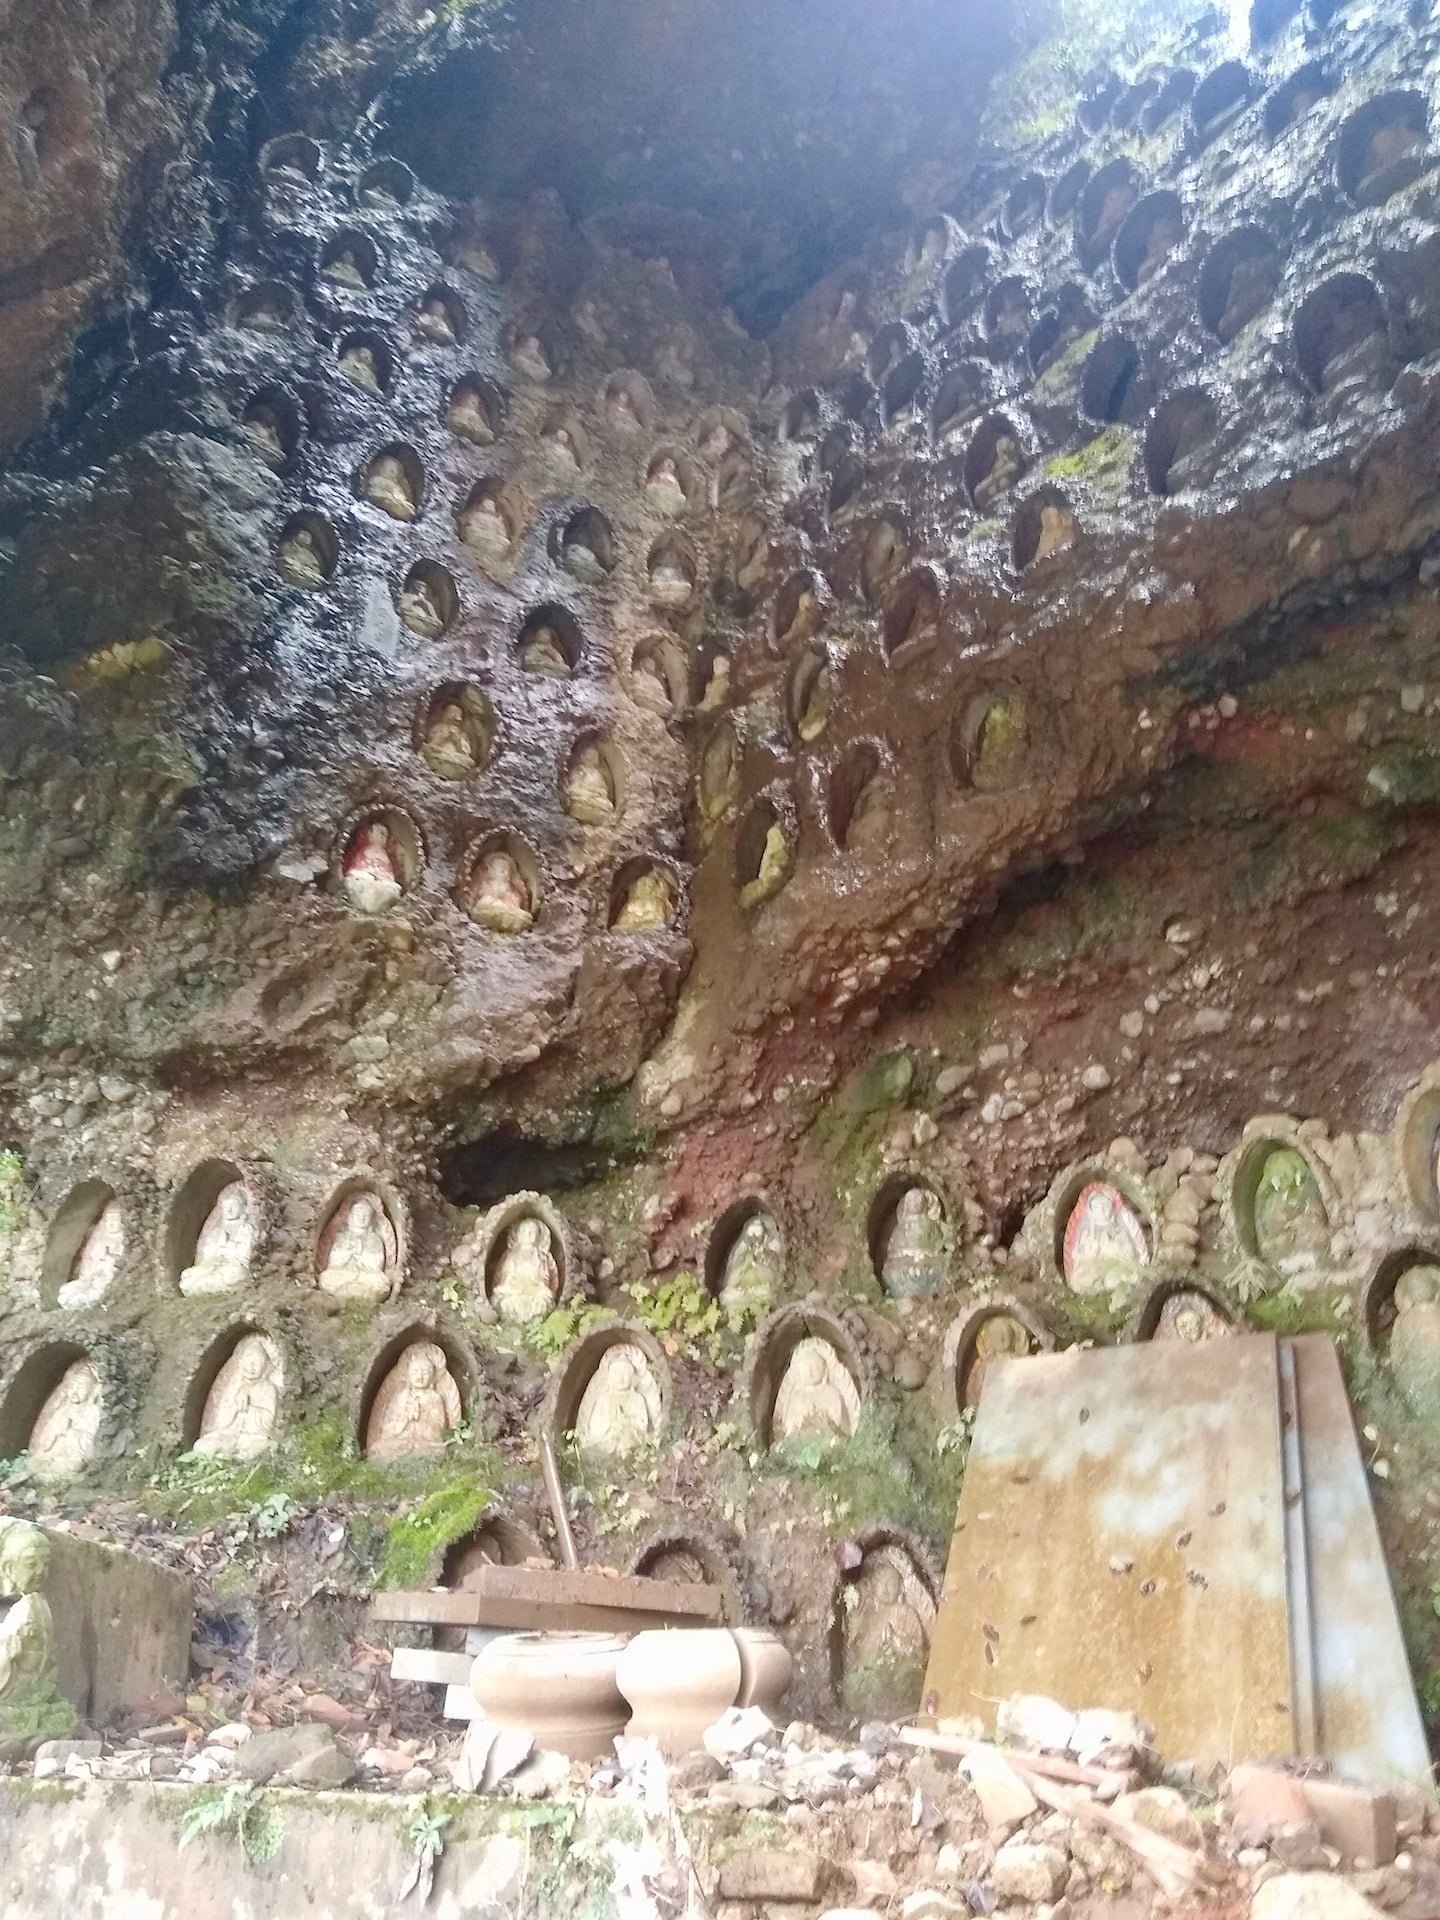 Different buddhist figures in the cave of Qingchengshan before going up to Baiyun Temple